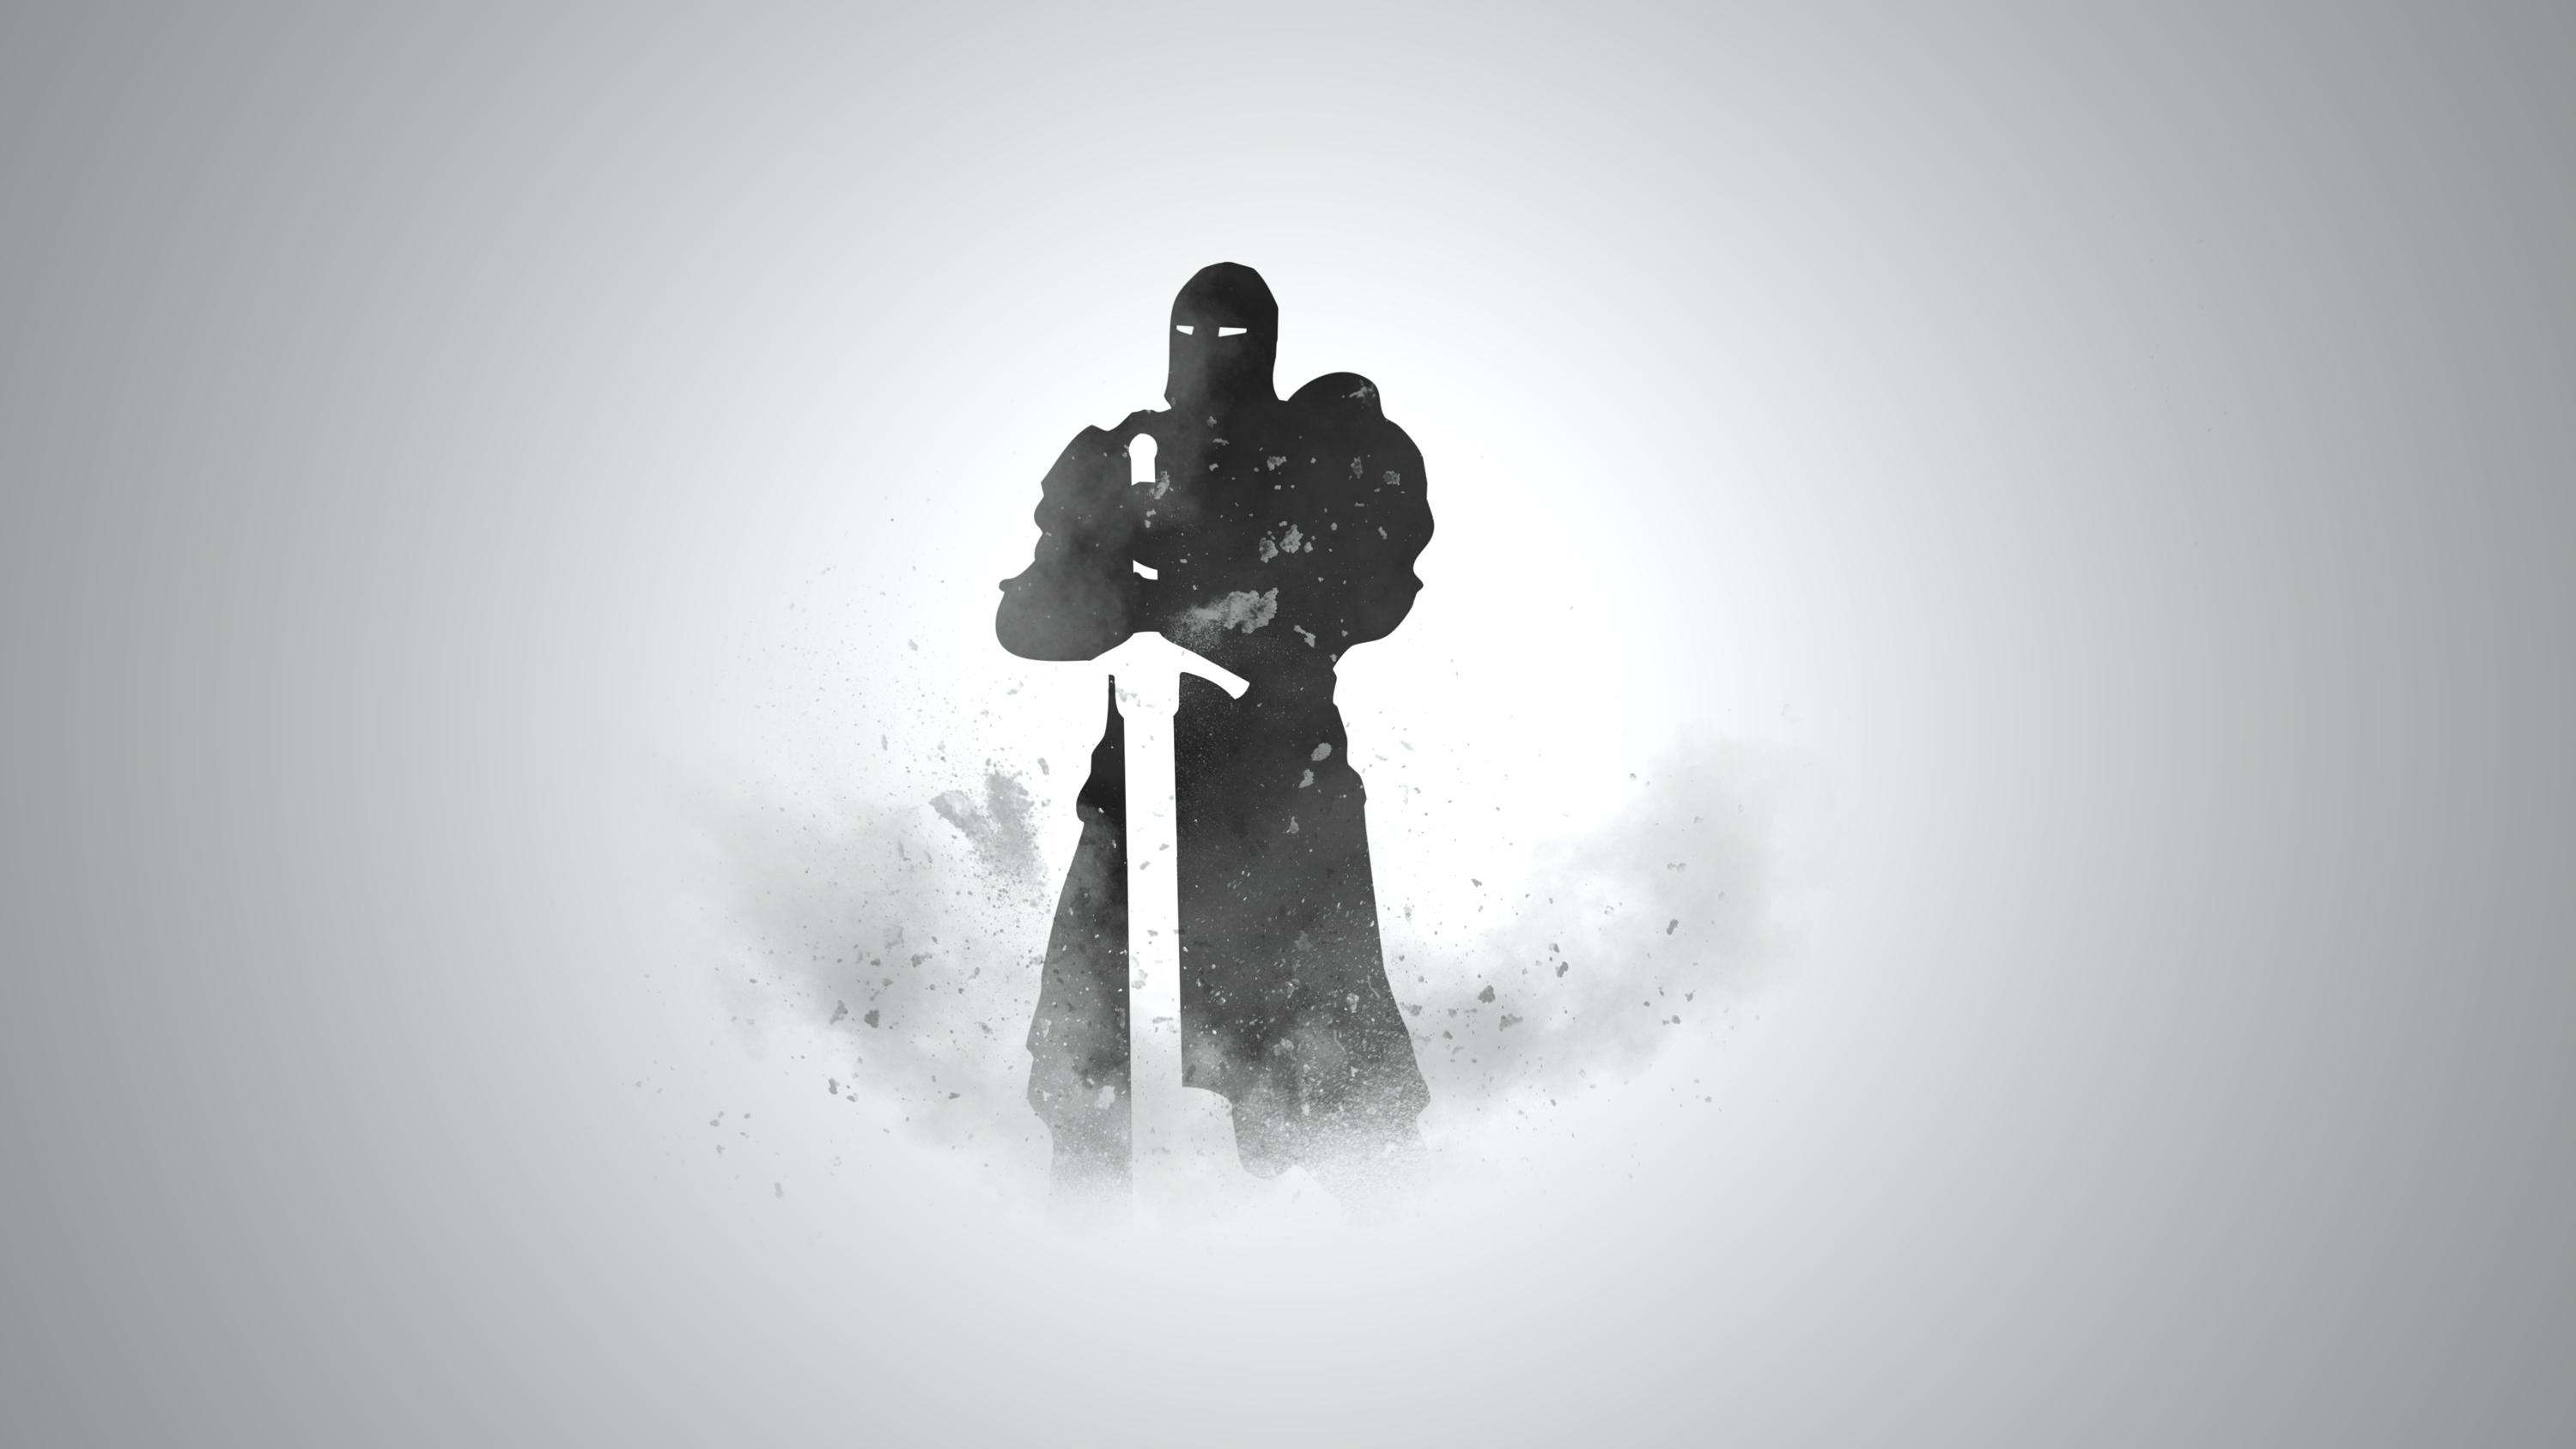 I tried another wallpaper with the Warden this time, I hope you